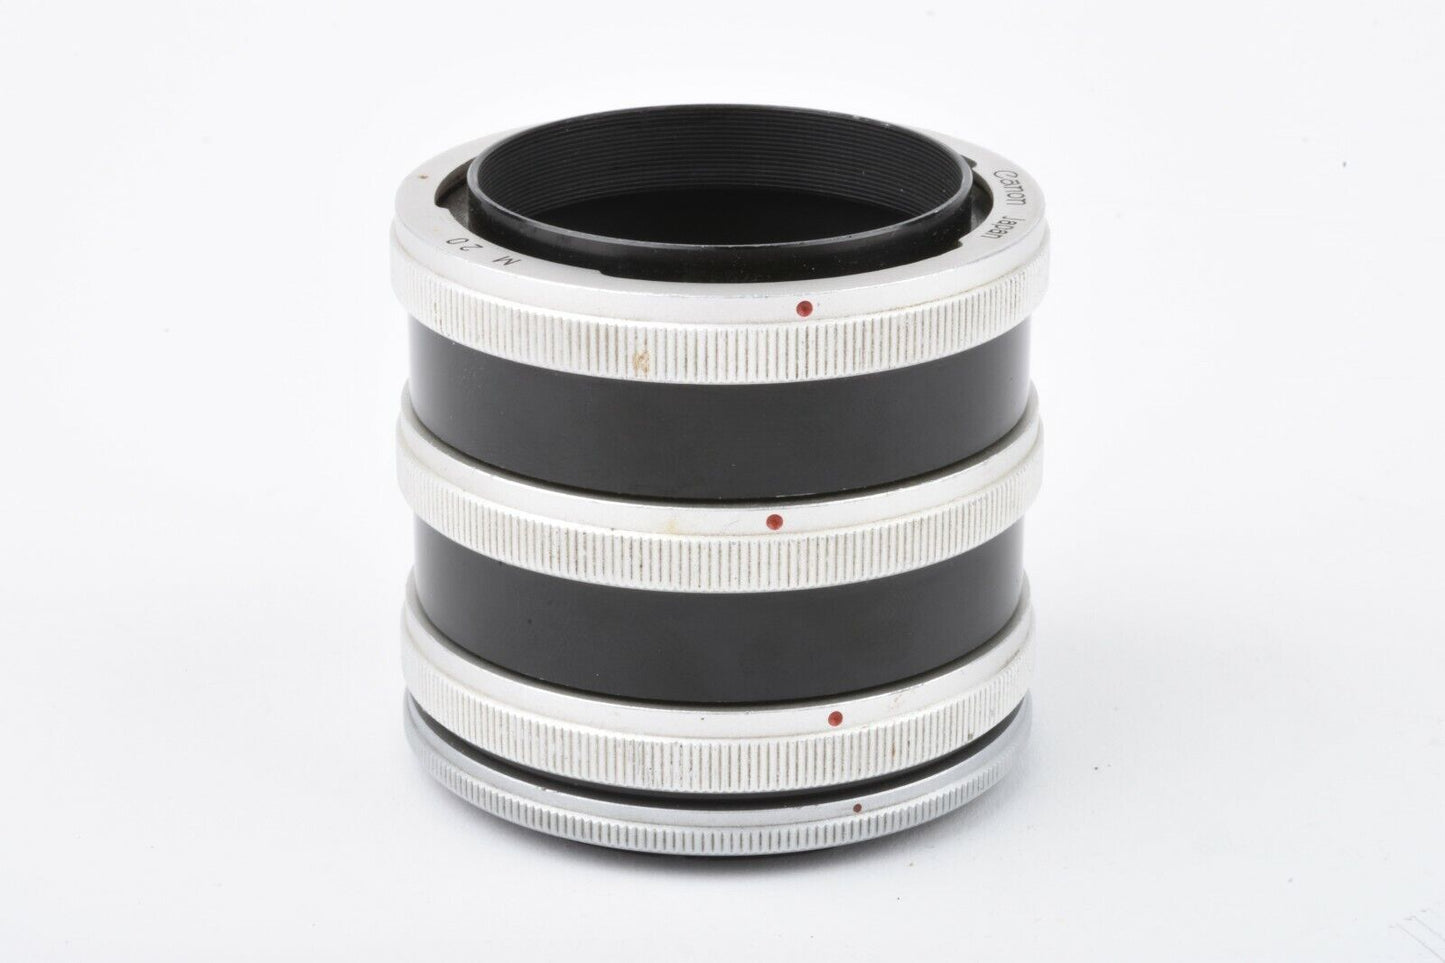 EXC++ CANON EXTENSION TUBE M SET (1X M5, 1X M10, 2X M20 RINGS), CLEAN, BOXED